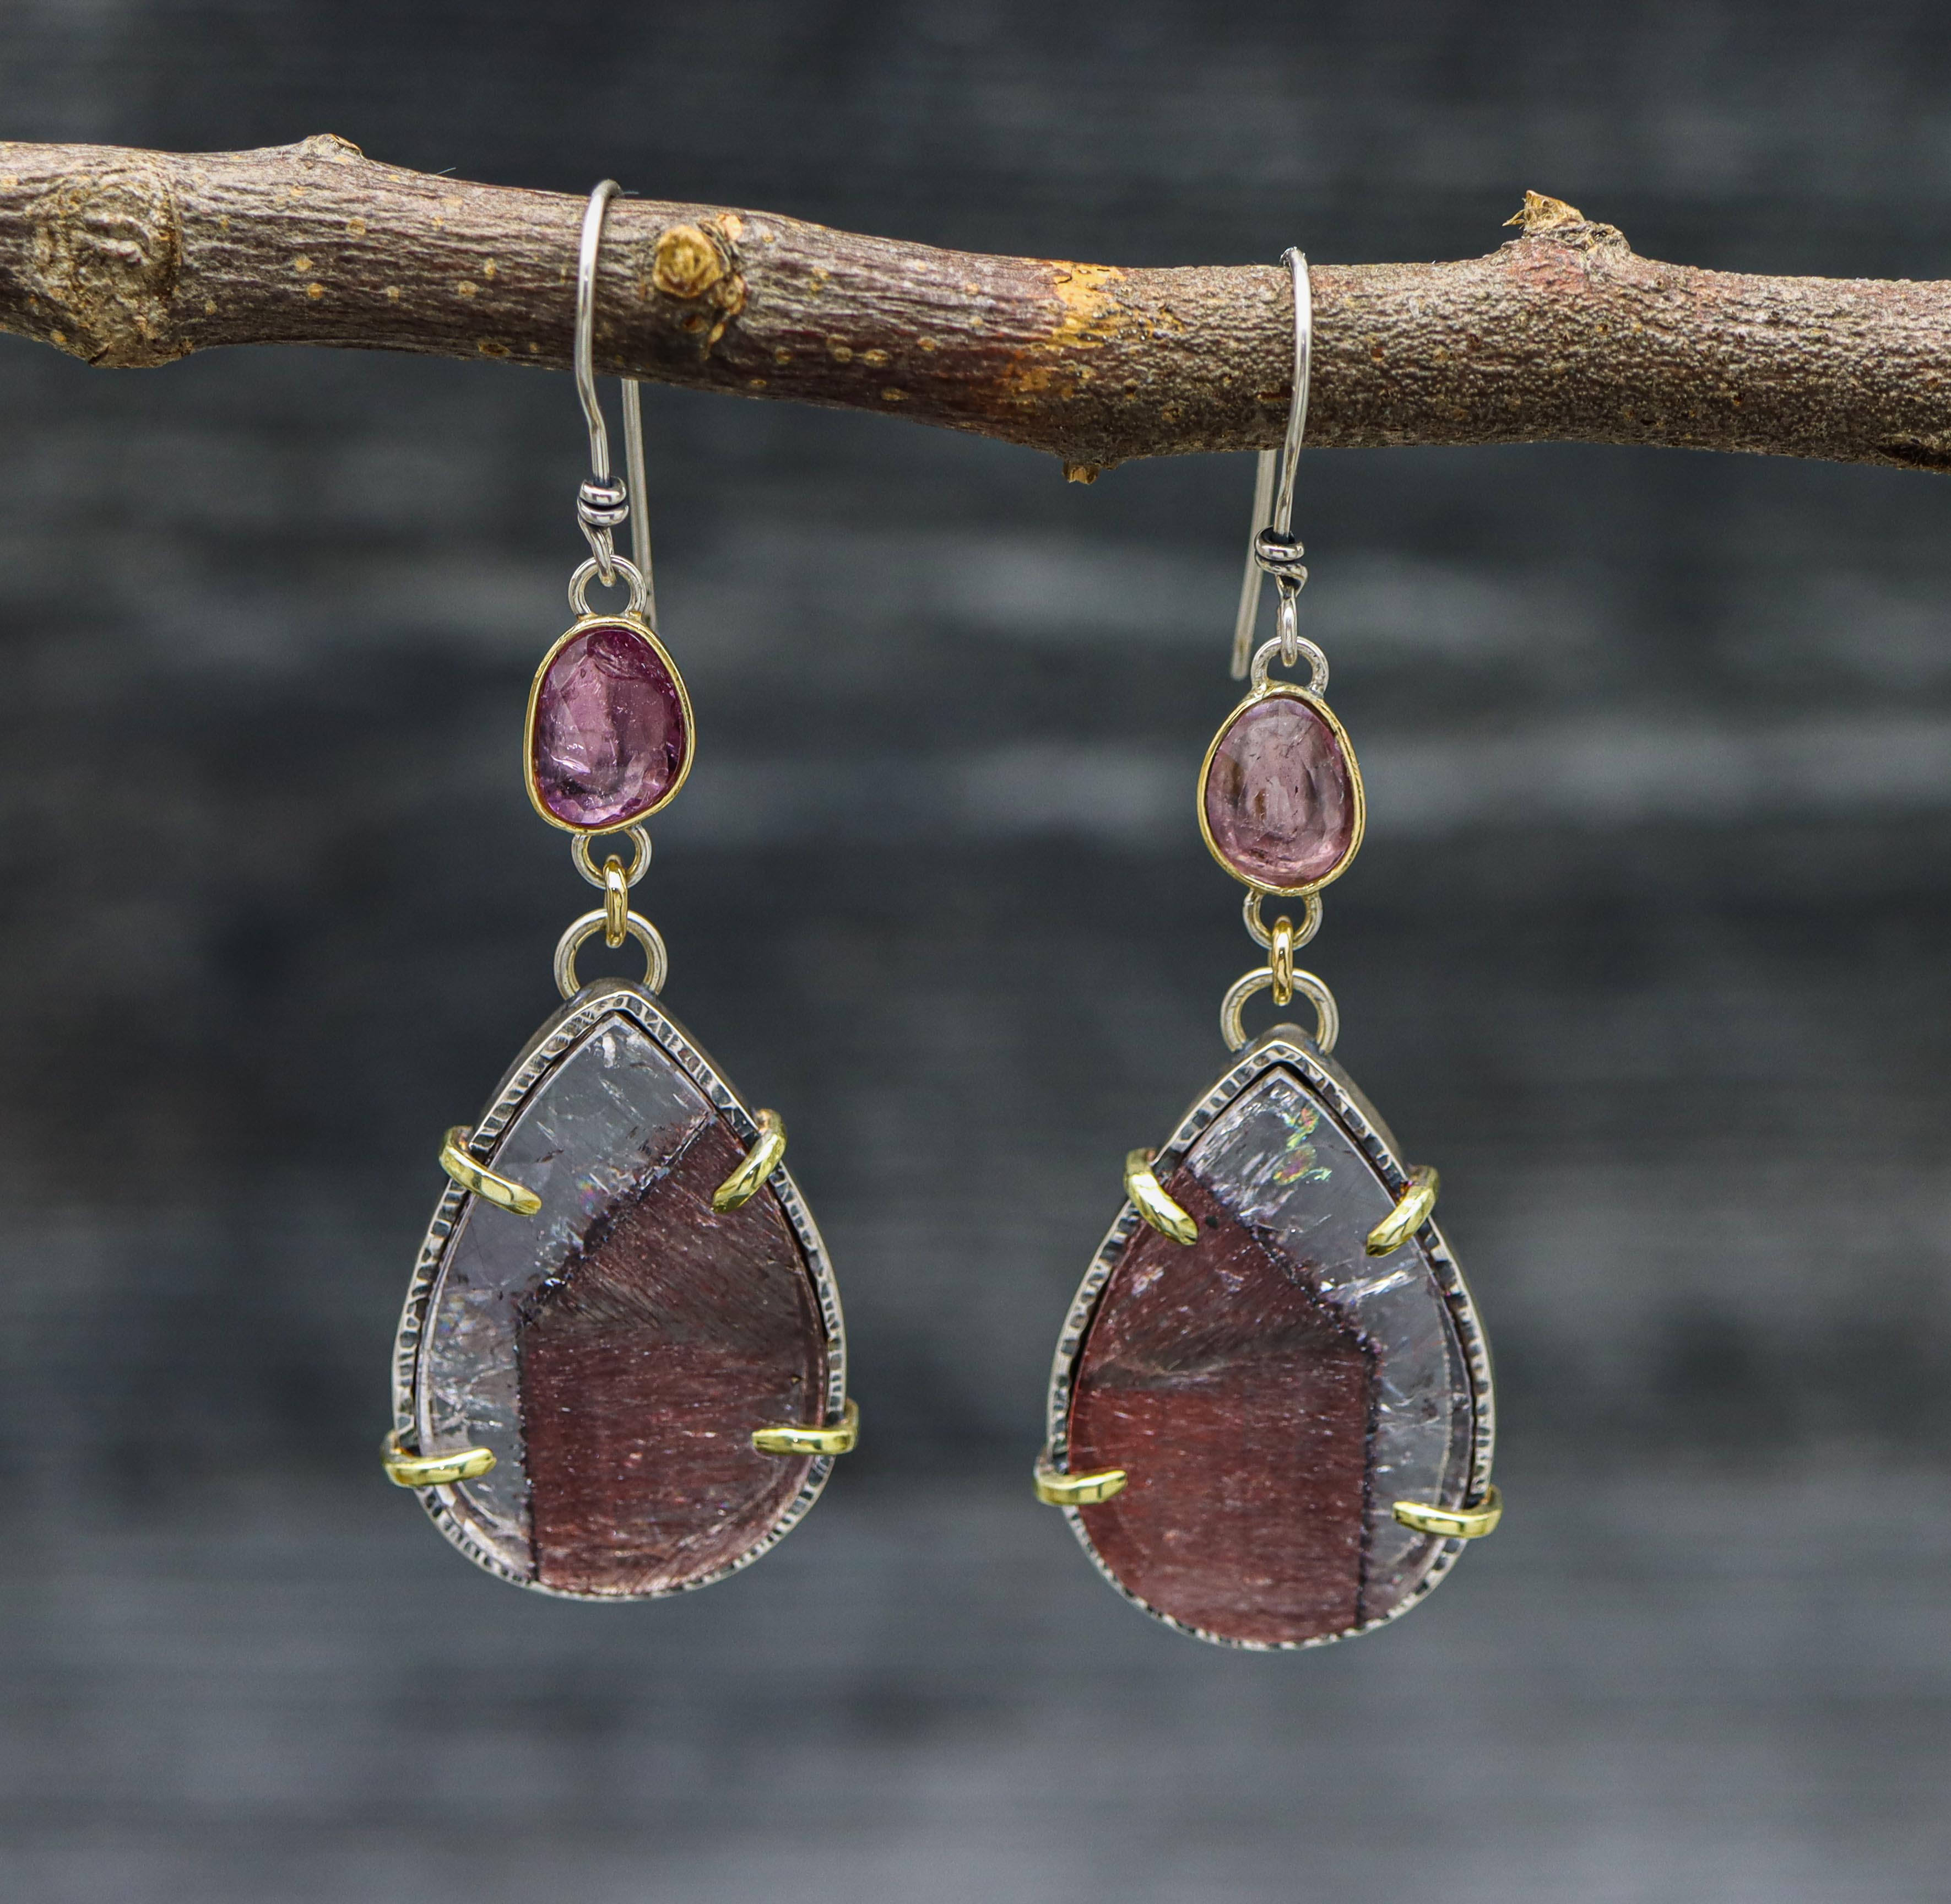 Super Seven and Pink Tourmaline Dangle Earrings Sterling Silver and 18k Gold